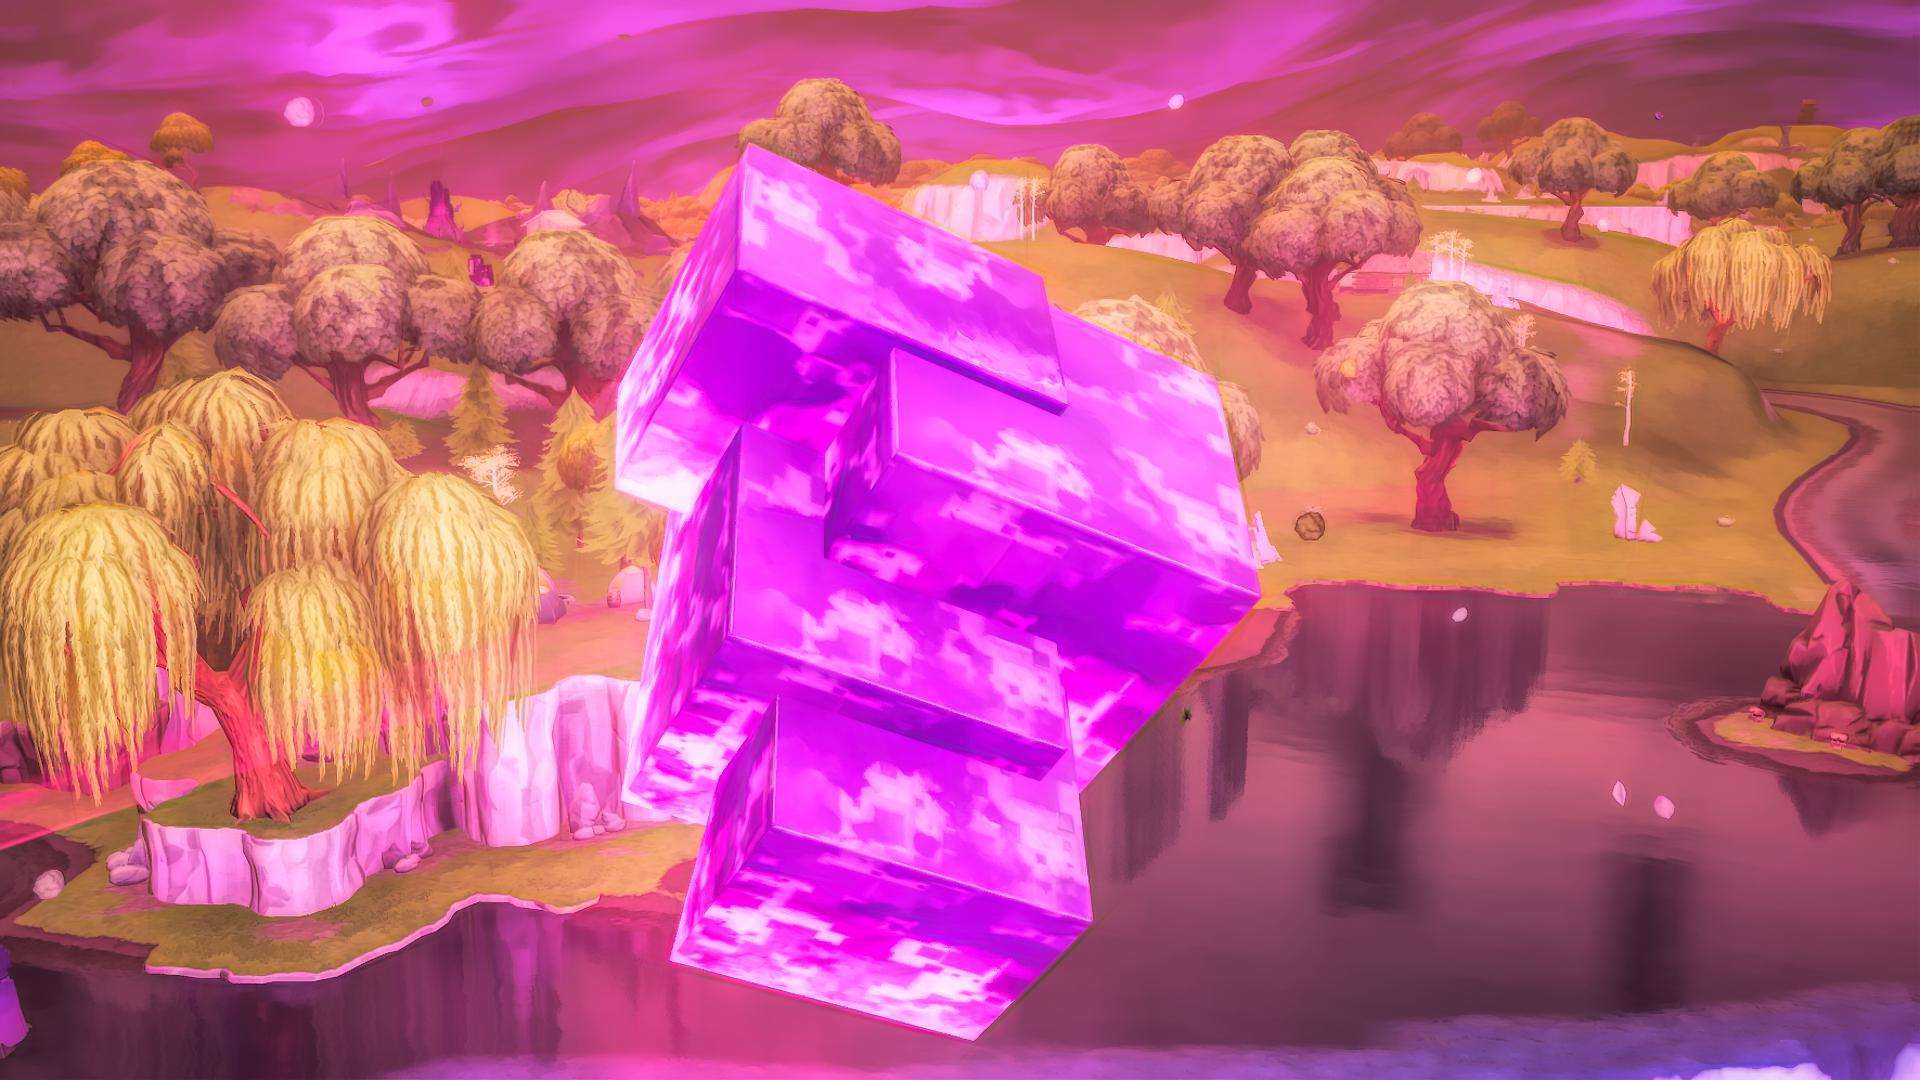 Fortnite 'Kevin' The Cube Explodes, Transporting Players To An